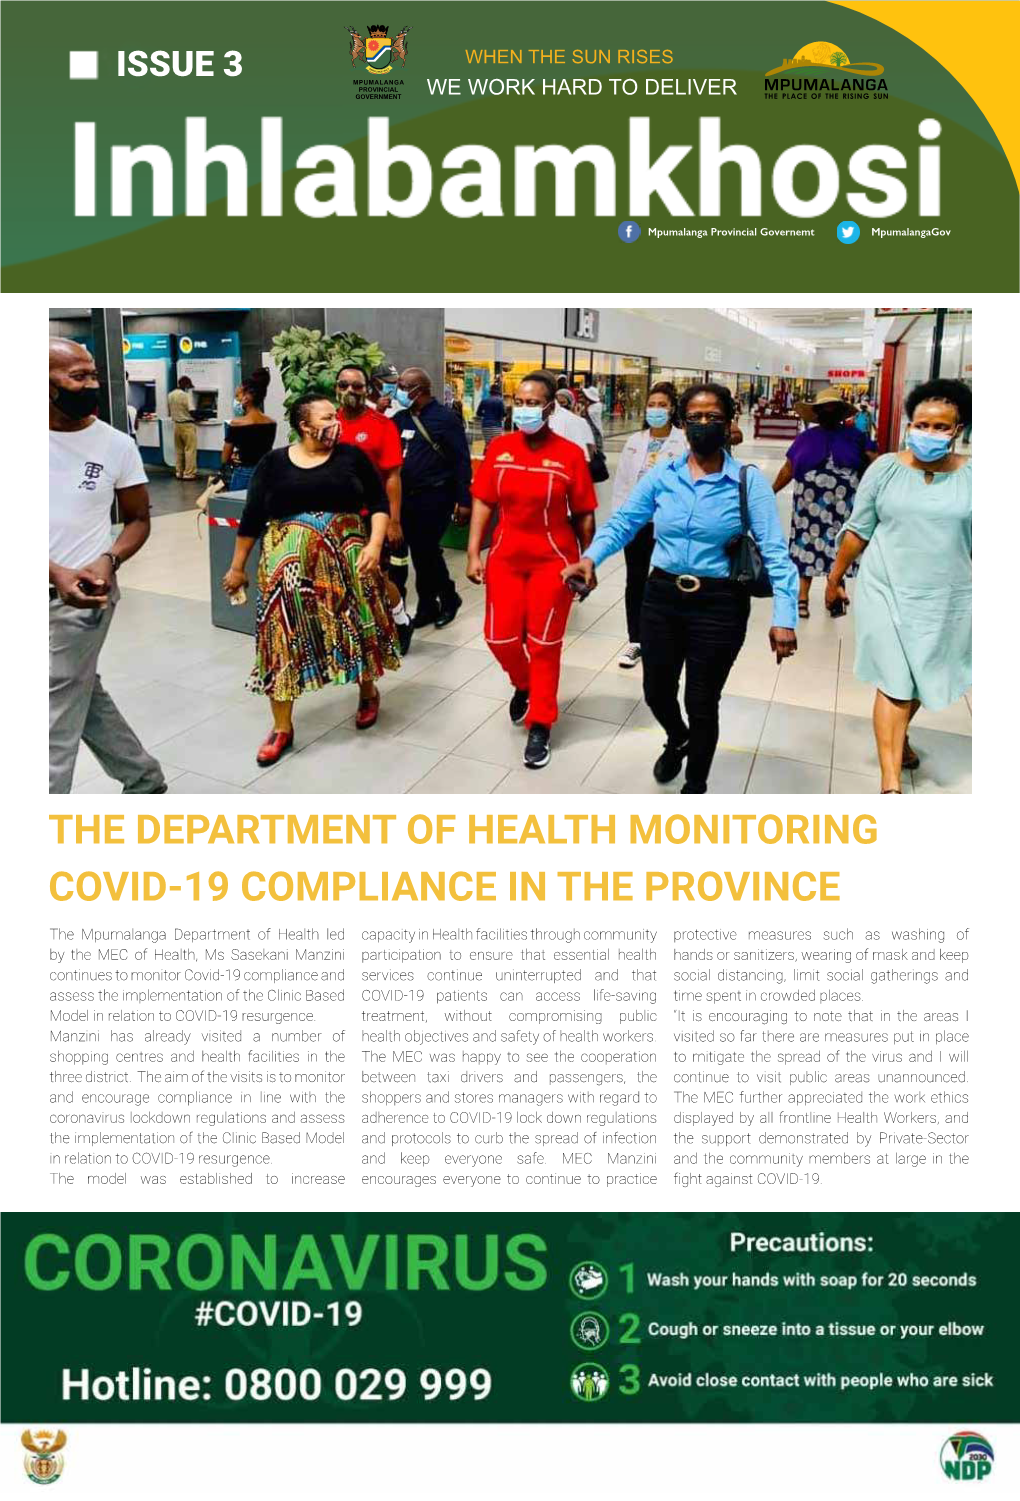 The Department of Health Monitoring Covid-19 Compliance in the Province